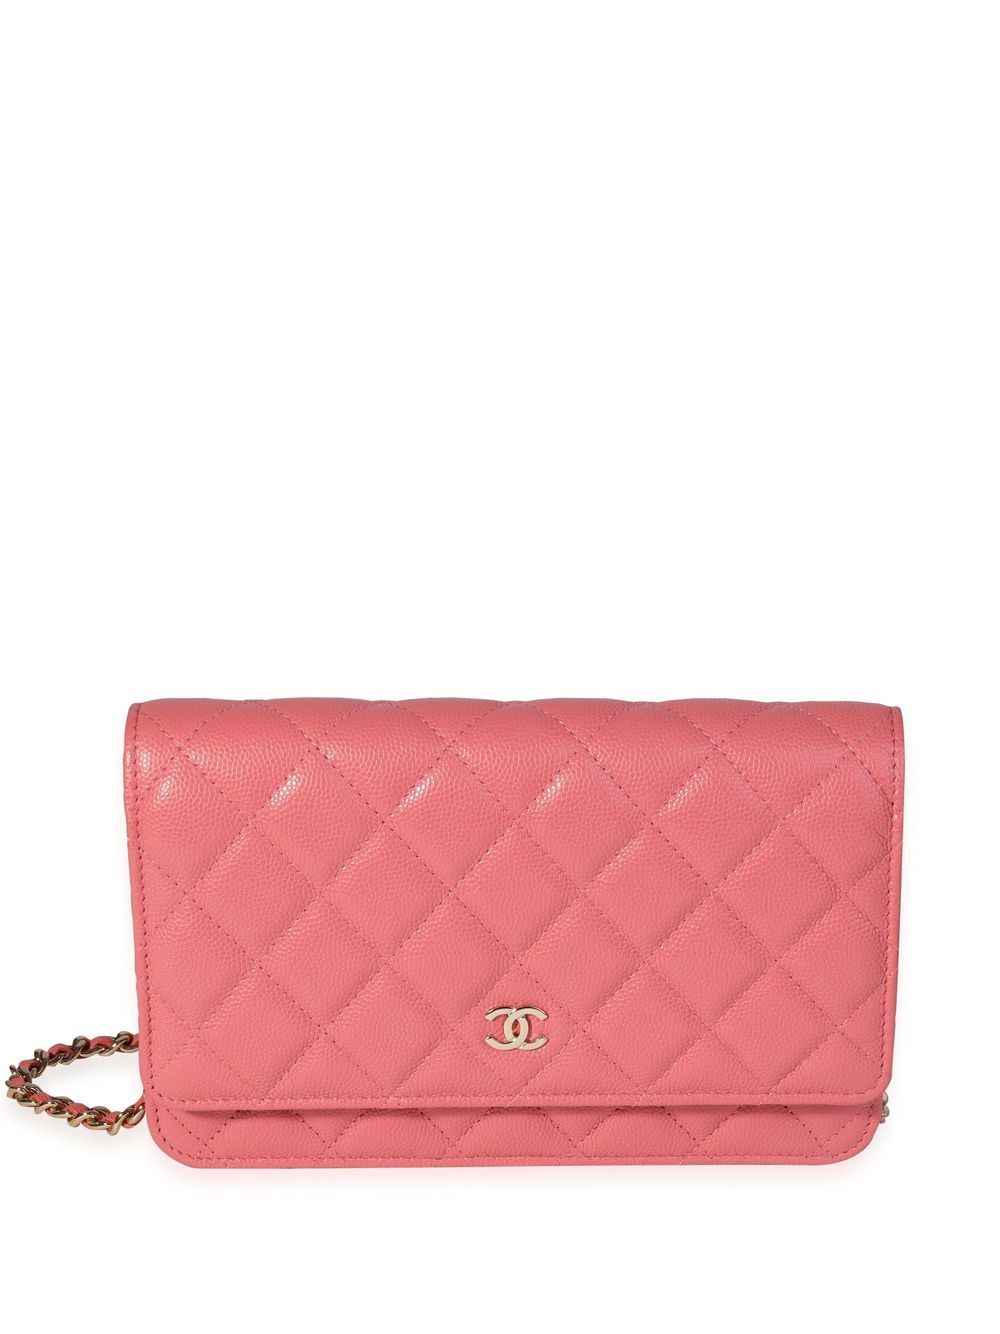 Image 1 of CHANEL Pre-Owned ココマーク チェーンウォレット